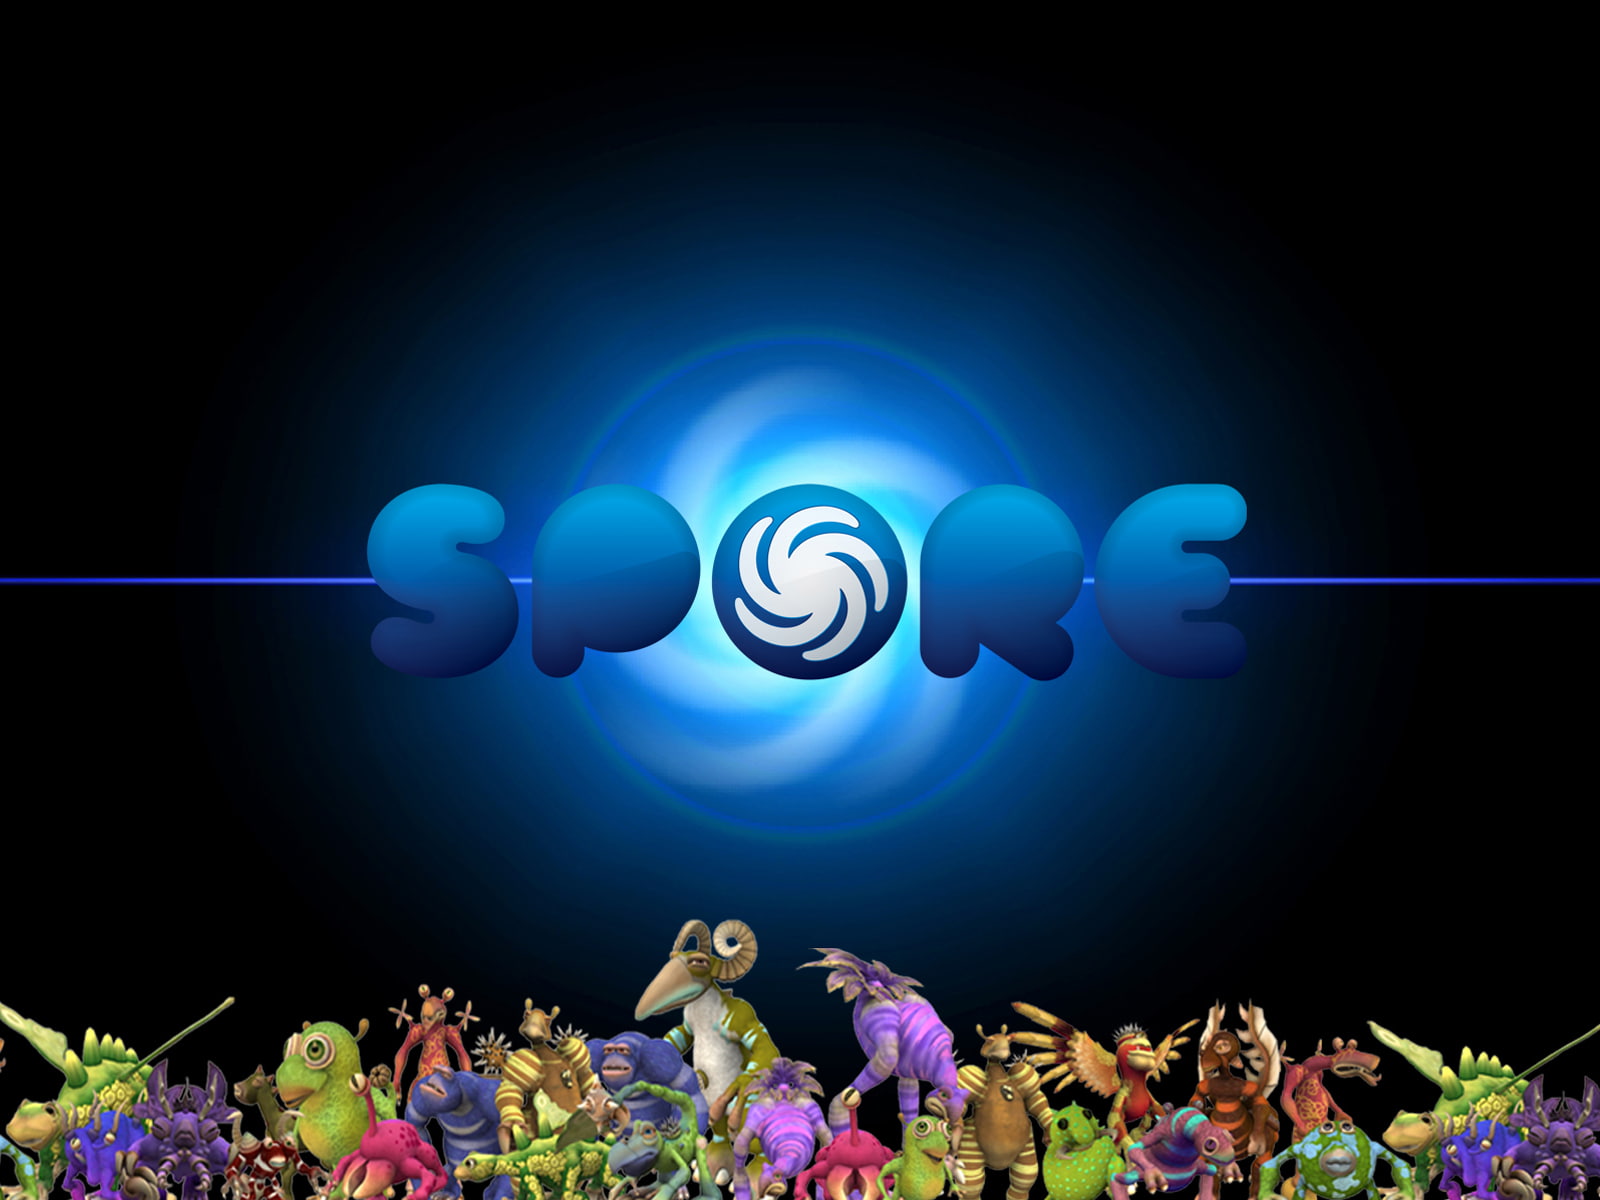 Spore PC Game, group of people, crowd, real people, large group of people